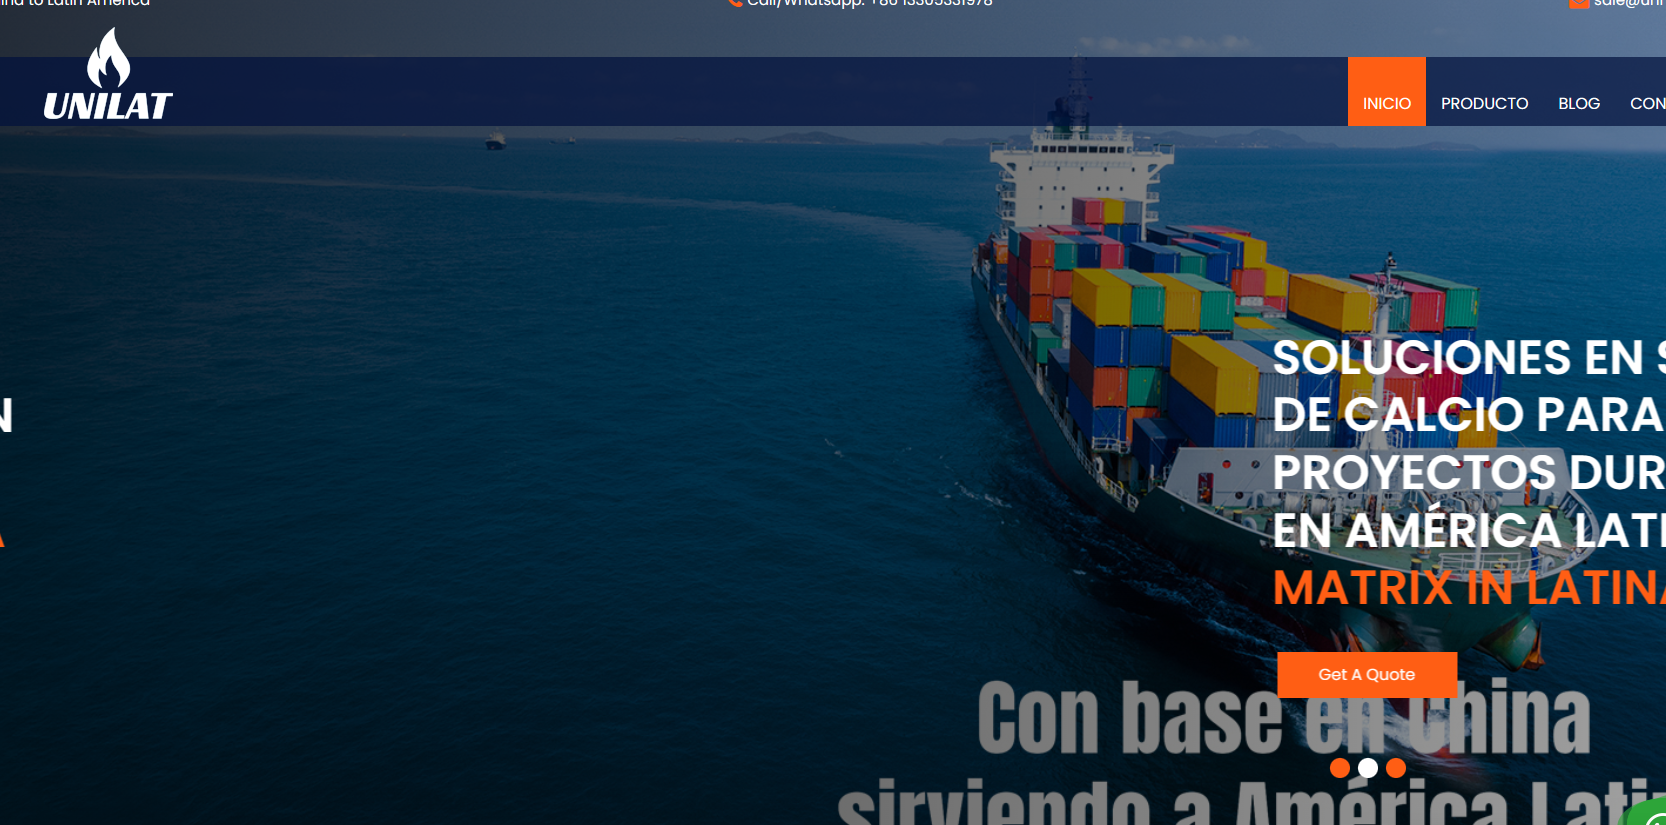 MATRIX Launches Export Sales Website for Calcium Silicate Board Services in Latin America